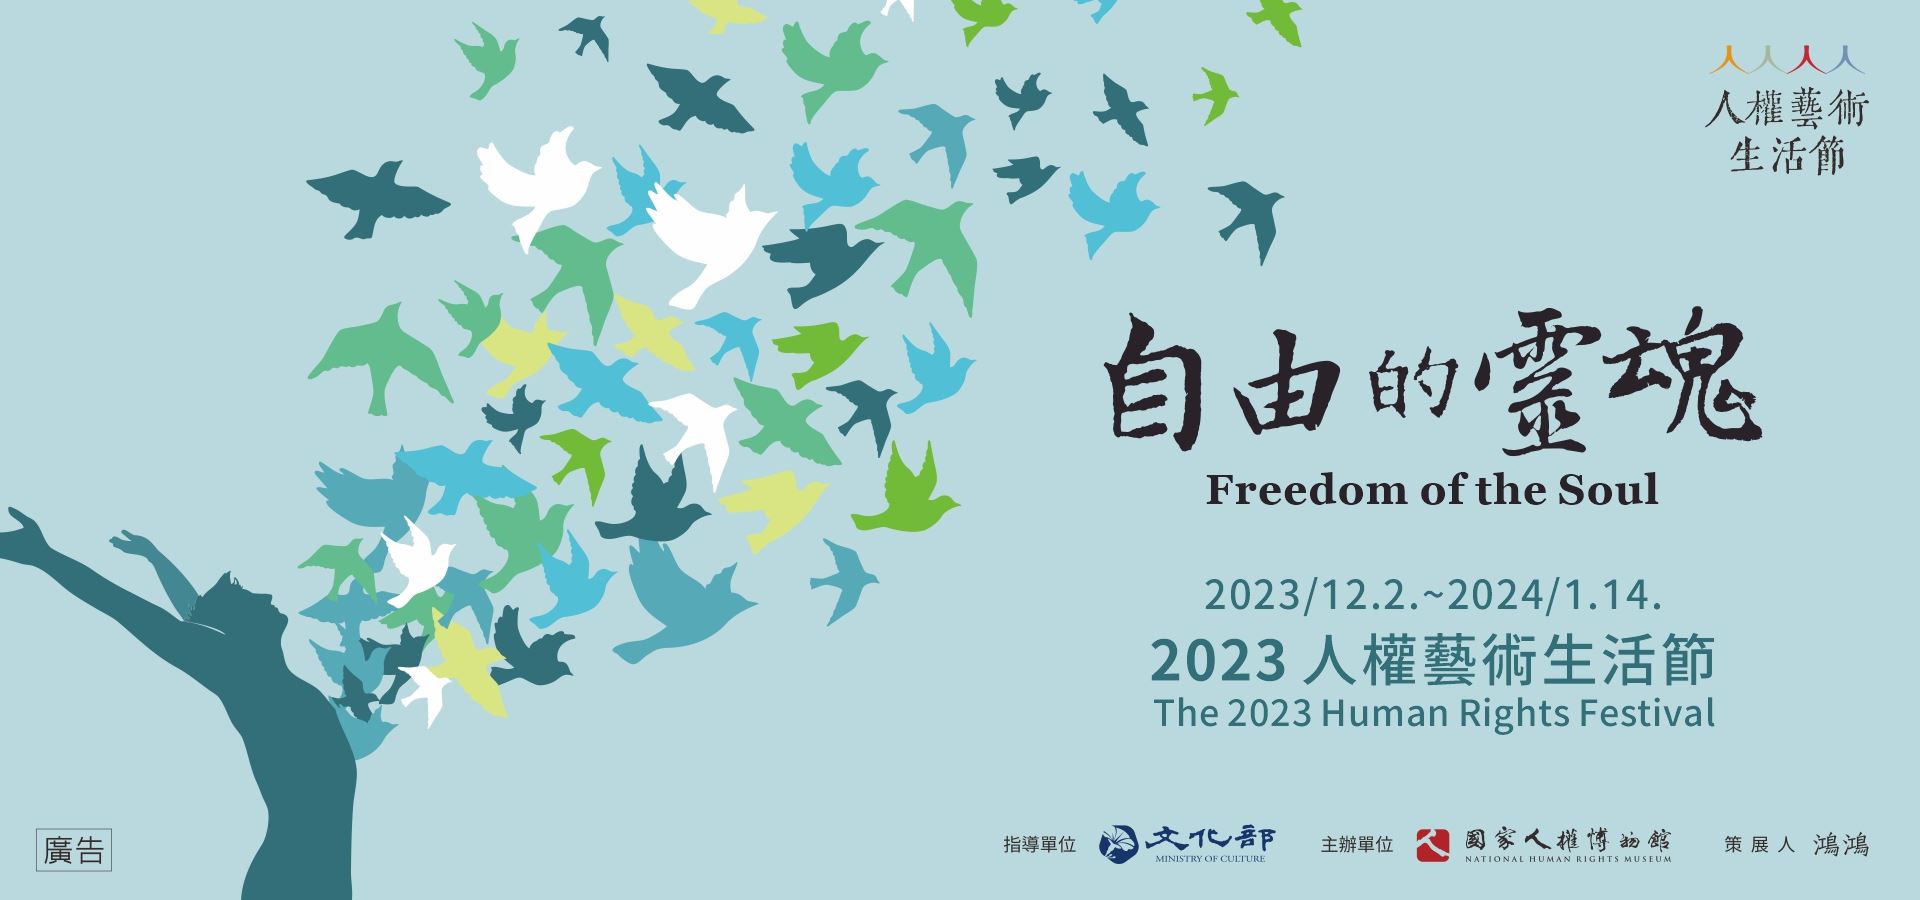 2023 Human Rights Festival to take place in New Taipei